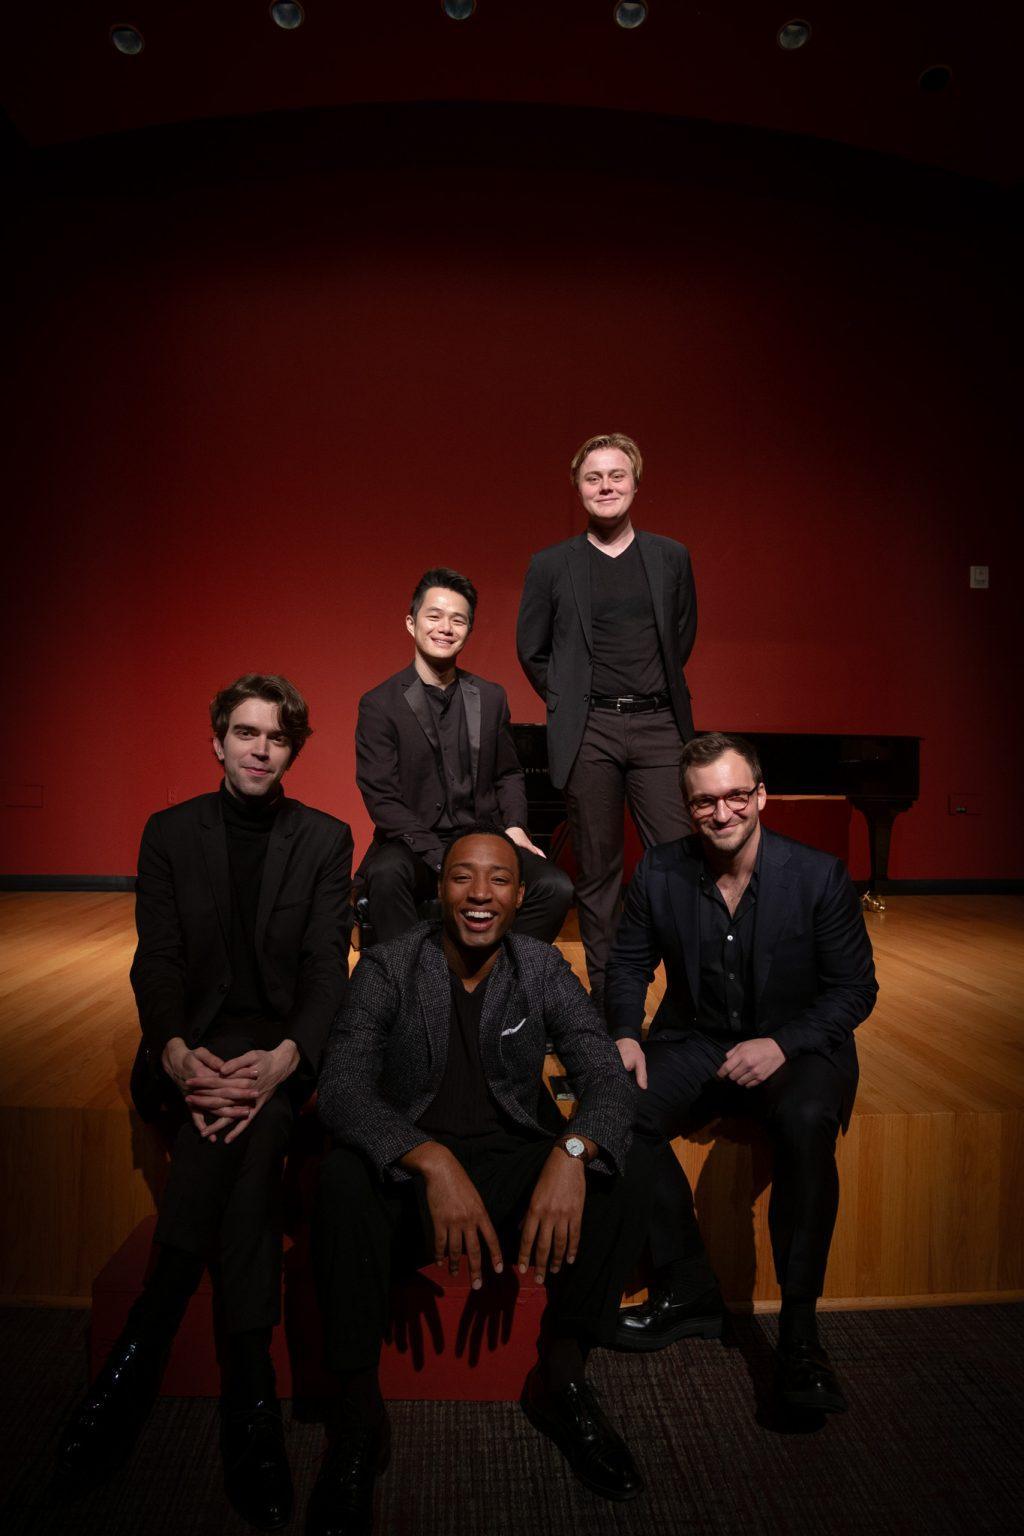 From left: Albert Cano-Smit, Joseph Parrish, Daniel McGrew, Lun Li and Jonathan Swenson gather in Raitt Recital Hall for a portrait after the show Jan. 21. The artists are acclaimed classical musicians in their respective instruments. Photos by Millie Auchard